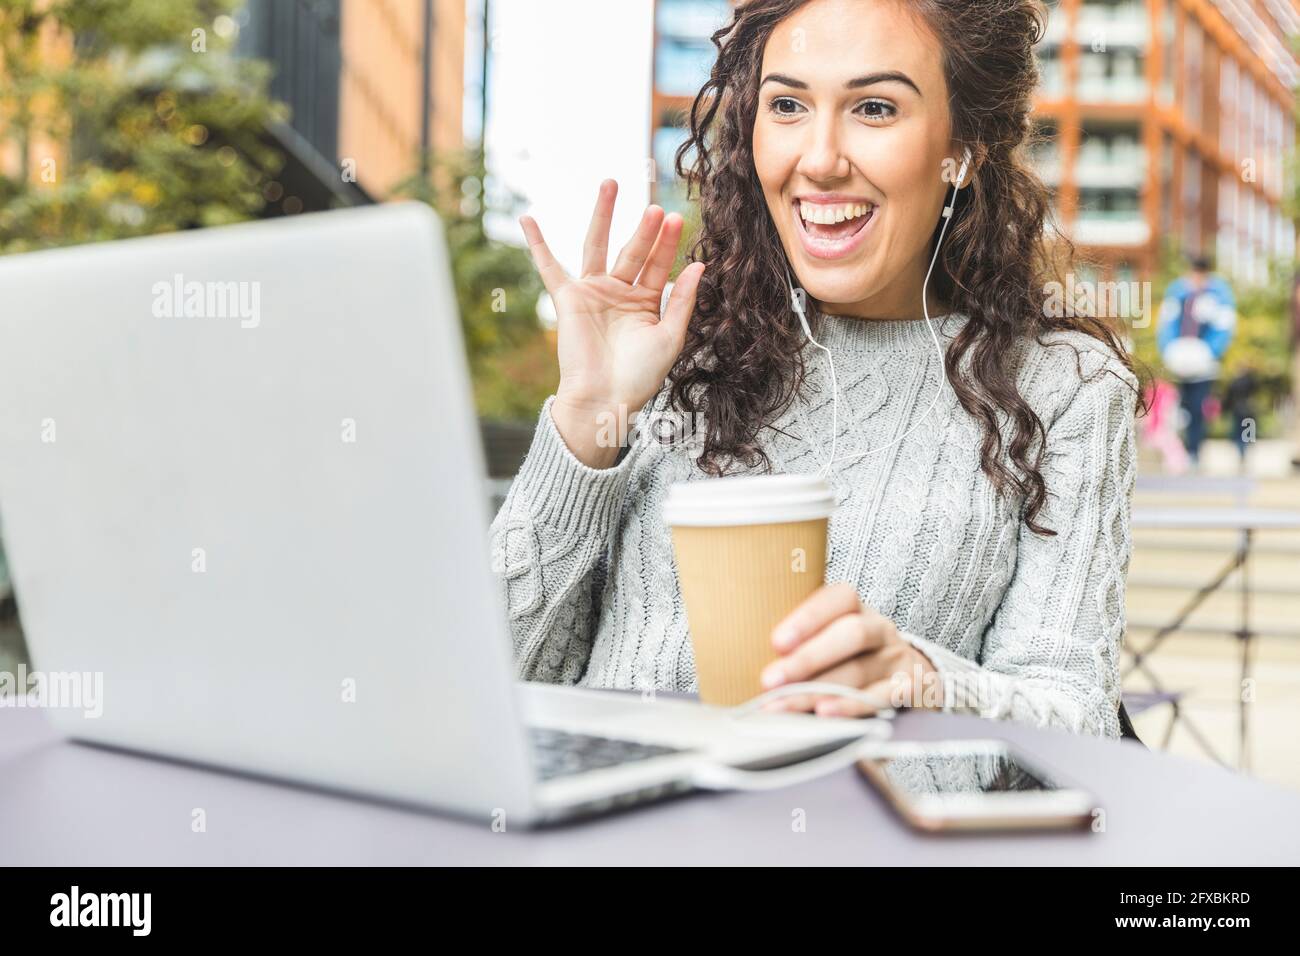 Smiling female professional waving during video call through laptop at cafe Stock Photo